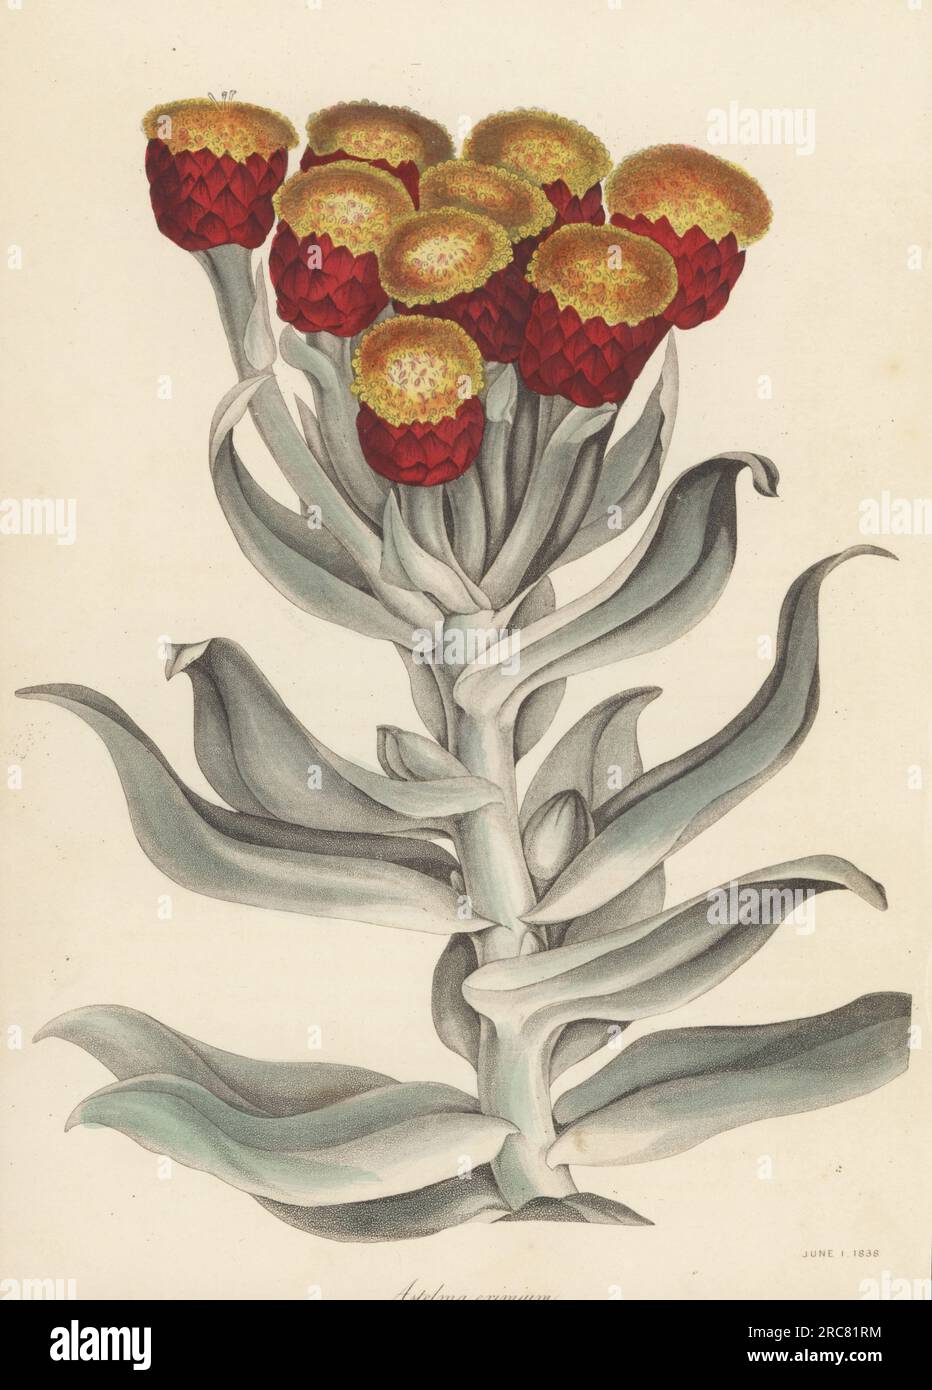 Everlasting, Syncarpha eximia. Native to the Eastern and Western Cape, South Africa, introduced by Scottish plant collector Colonel William Patterson in 1793. Fine astelma, Astelma eximium, Gnaphalium eximium. Handcoloured lithograph from Joseph Paxton’s Magazine of Botany, and Register of Flowering Plants, Volume 5, Orr and Smith, London, 1838. Stock Photo